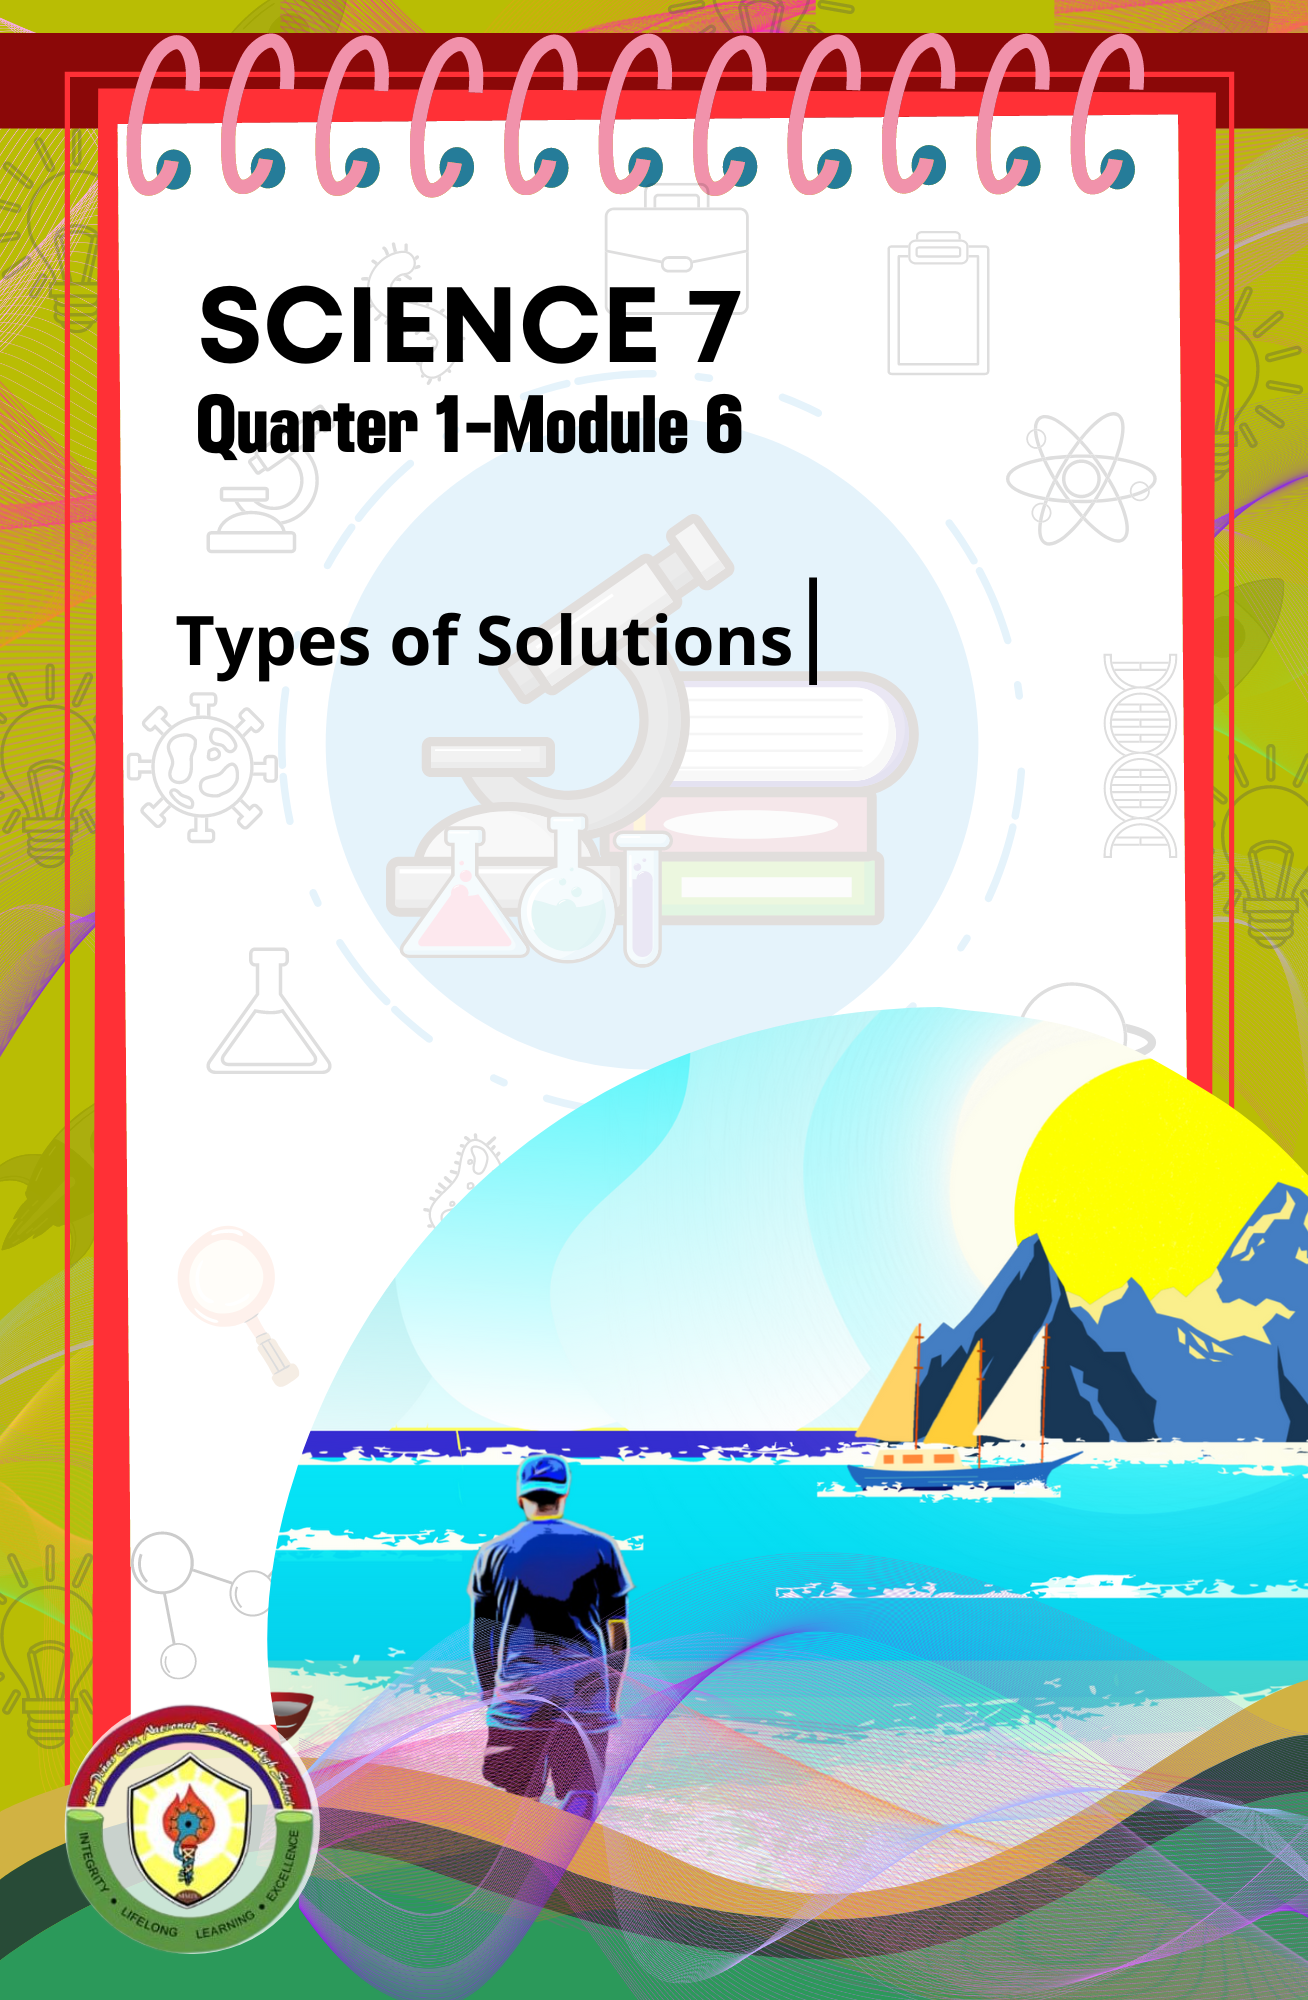 320304_Las Piñas City National Science High School_Science_7_Quarter 1_Module 6_Types of Solutions